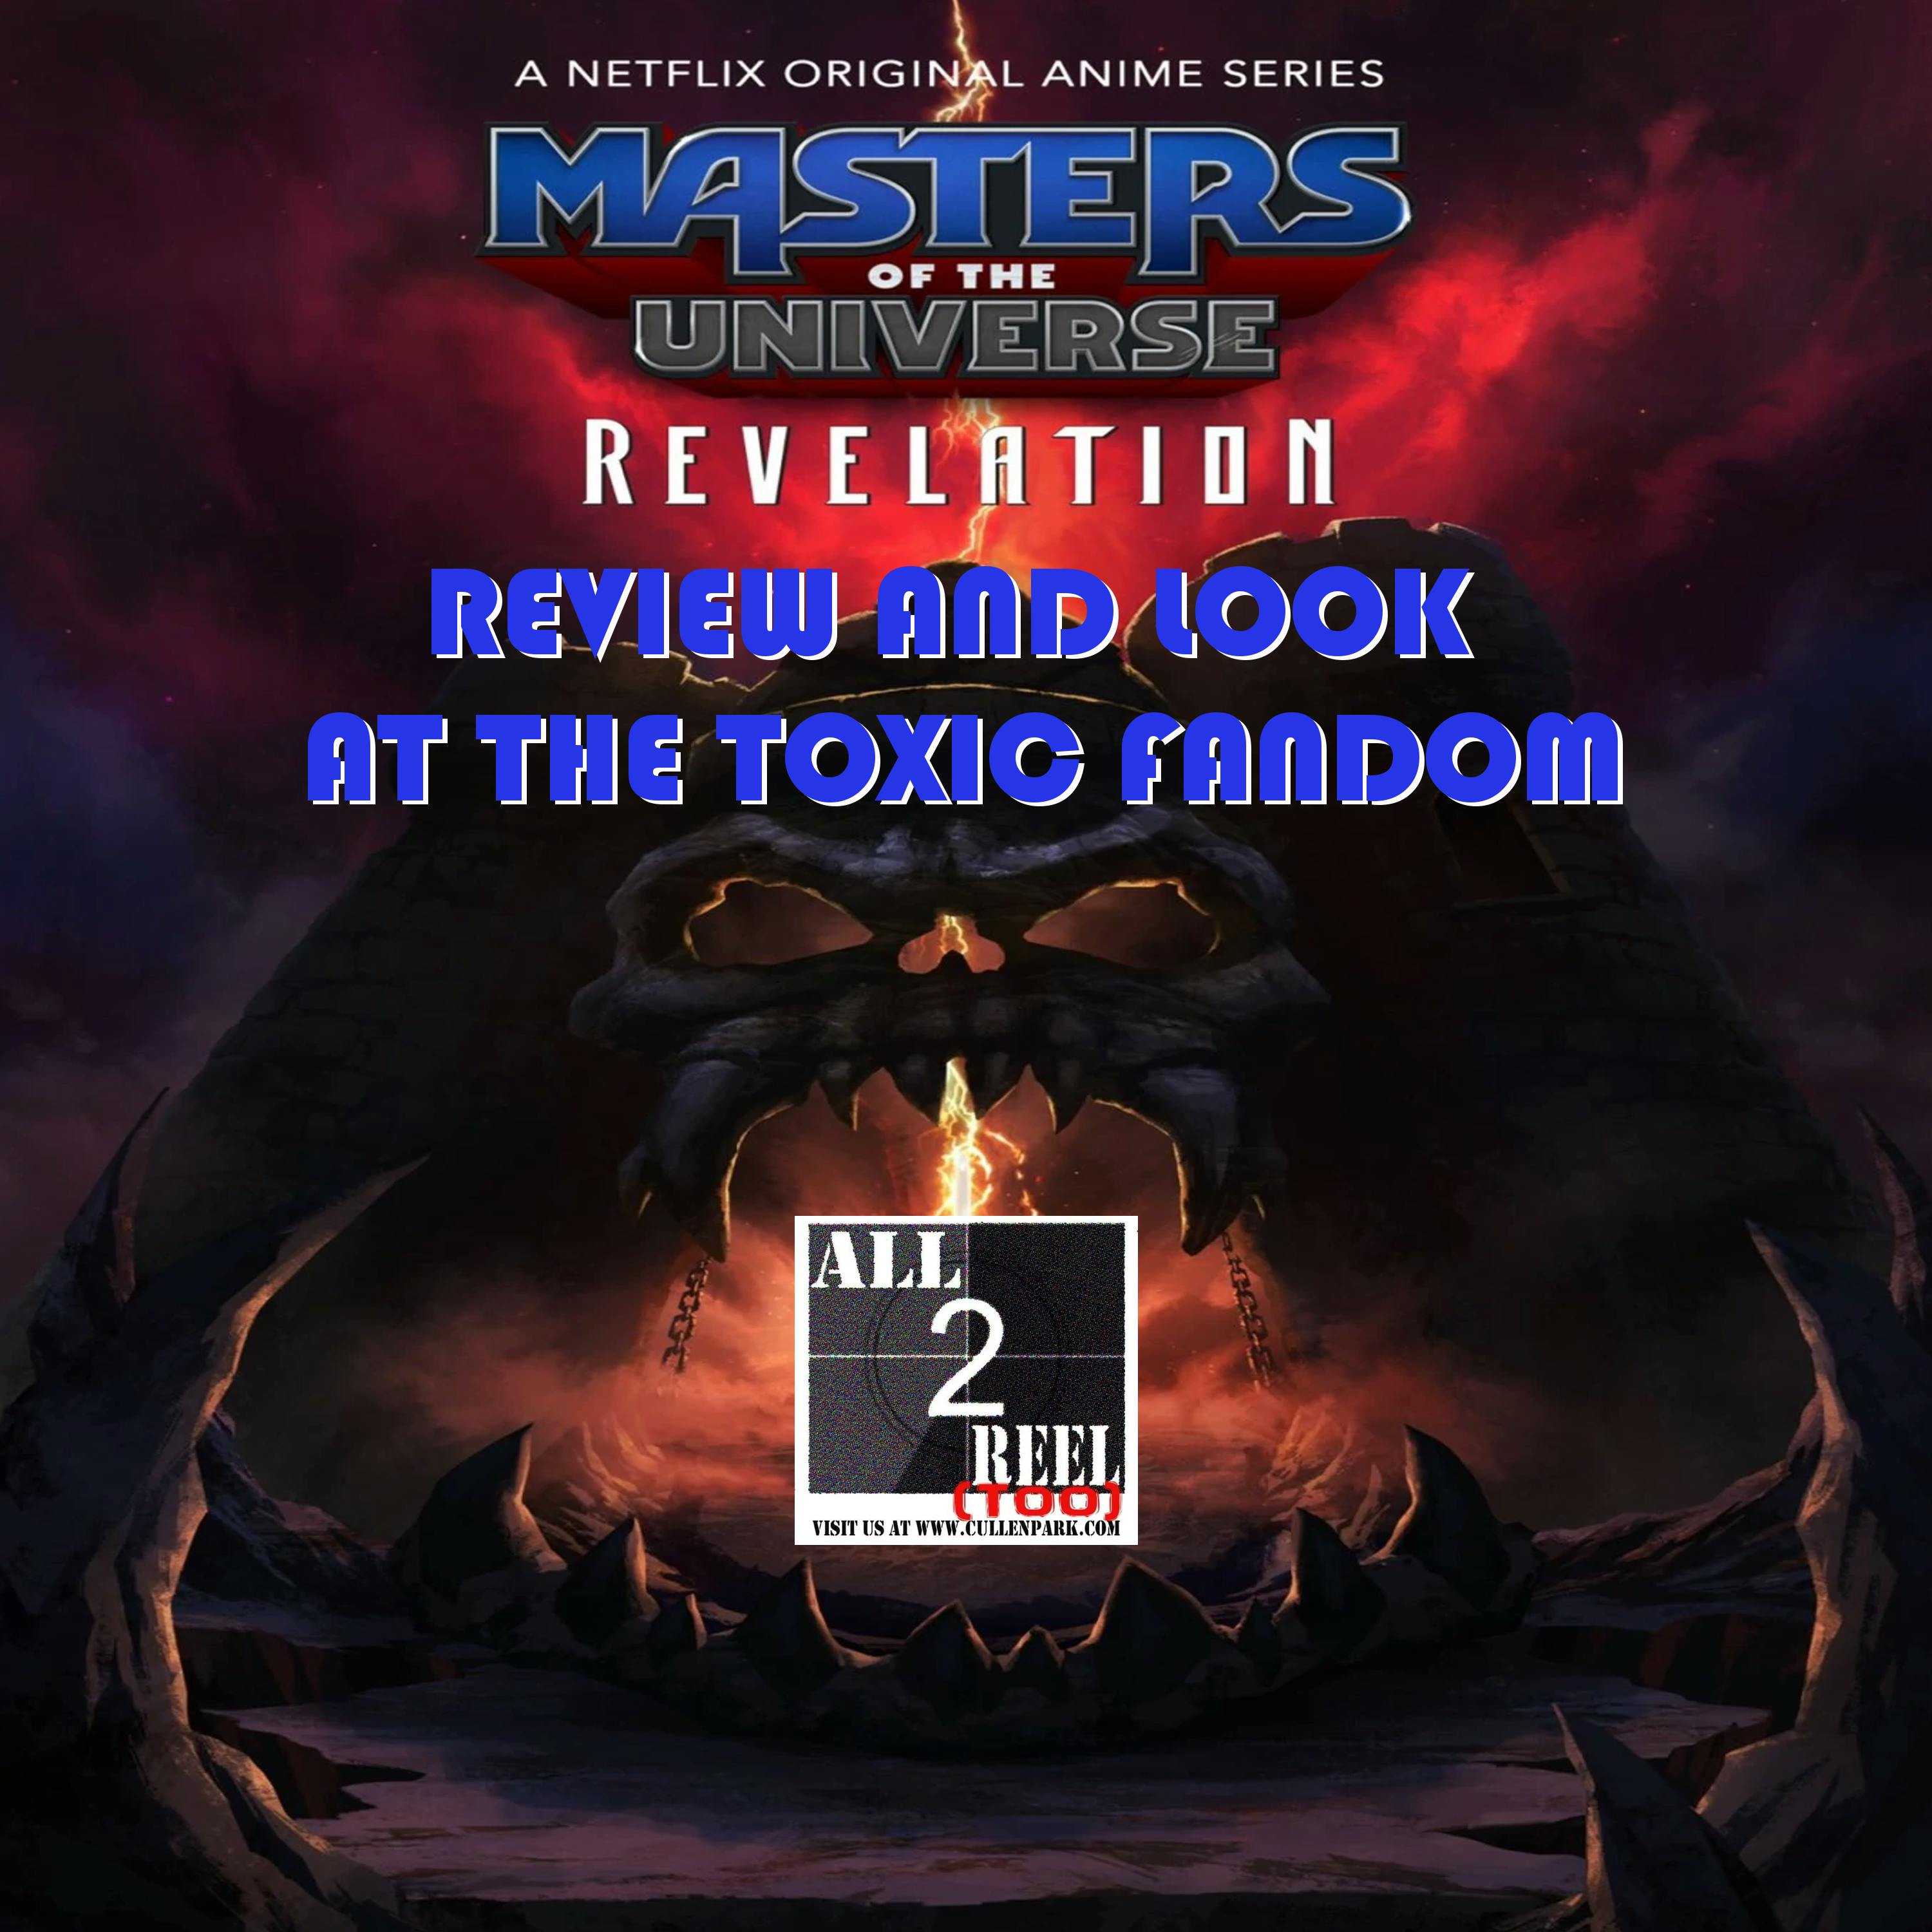 MASTERS OF THE UNIVERSE: REVELATION - REVIEW AND LOOK AT THE TOXIC FANDOM